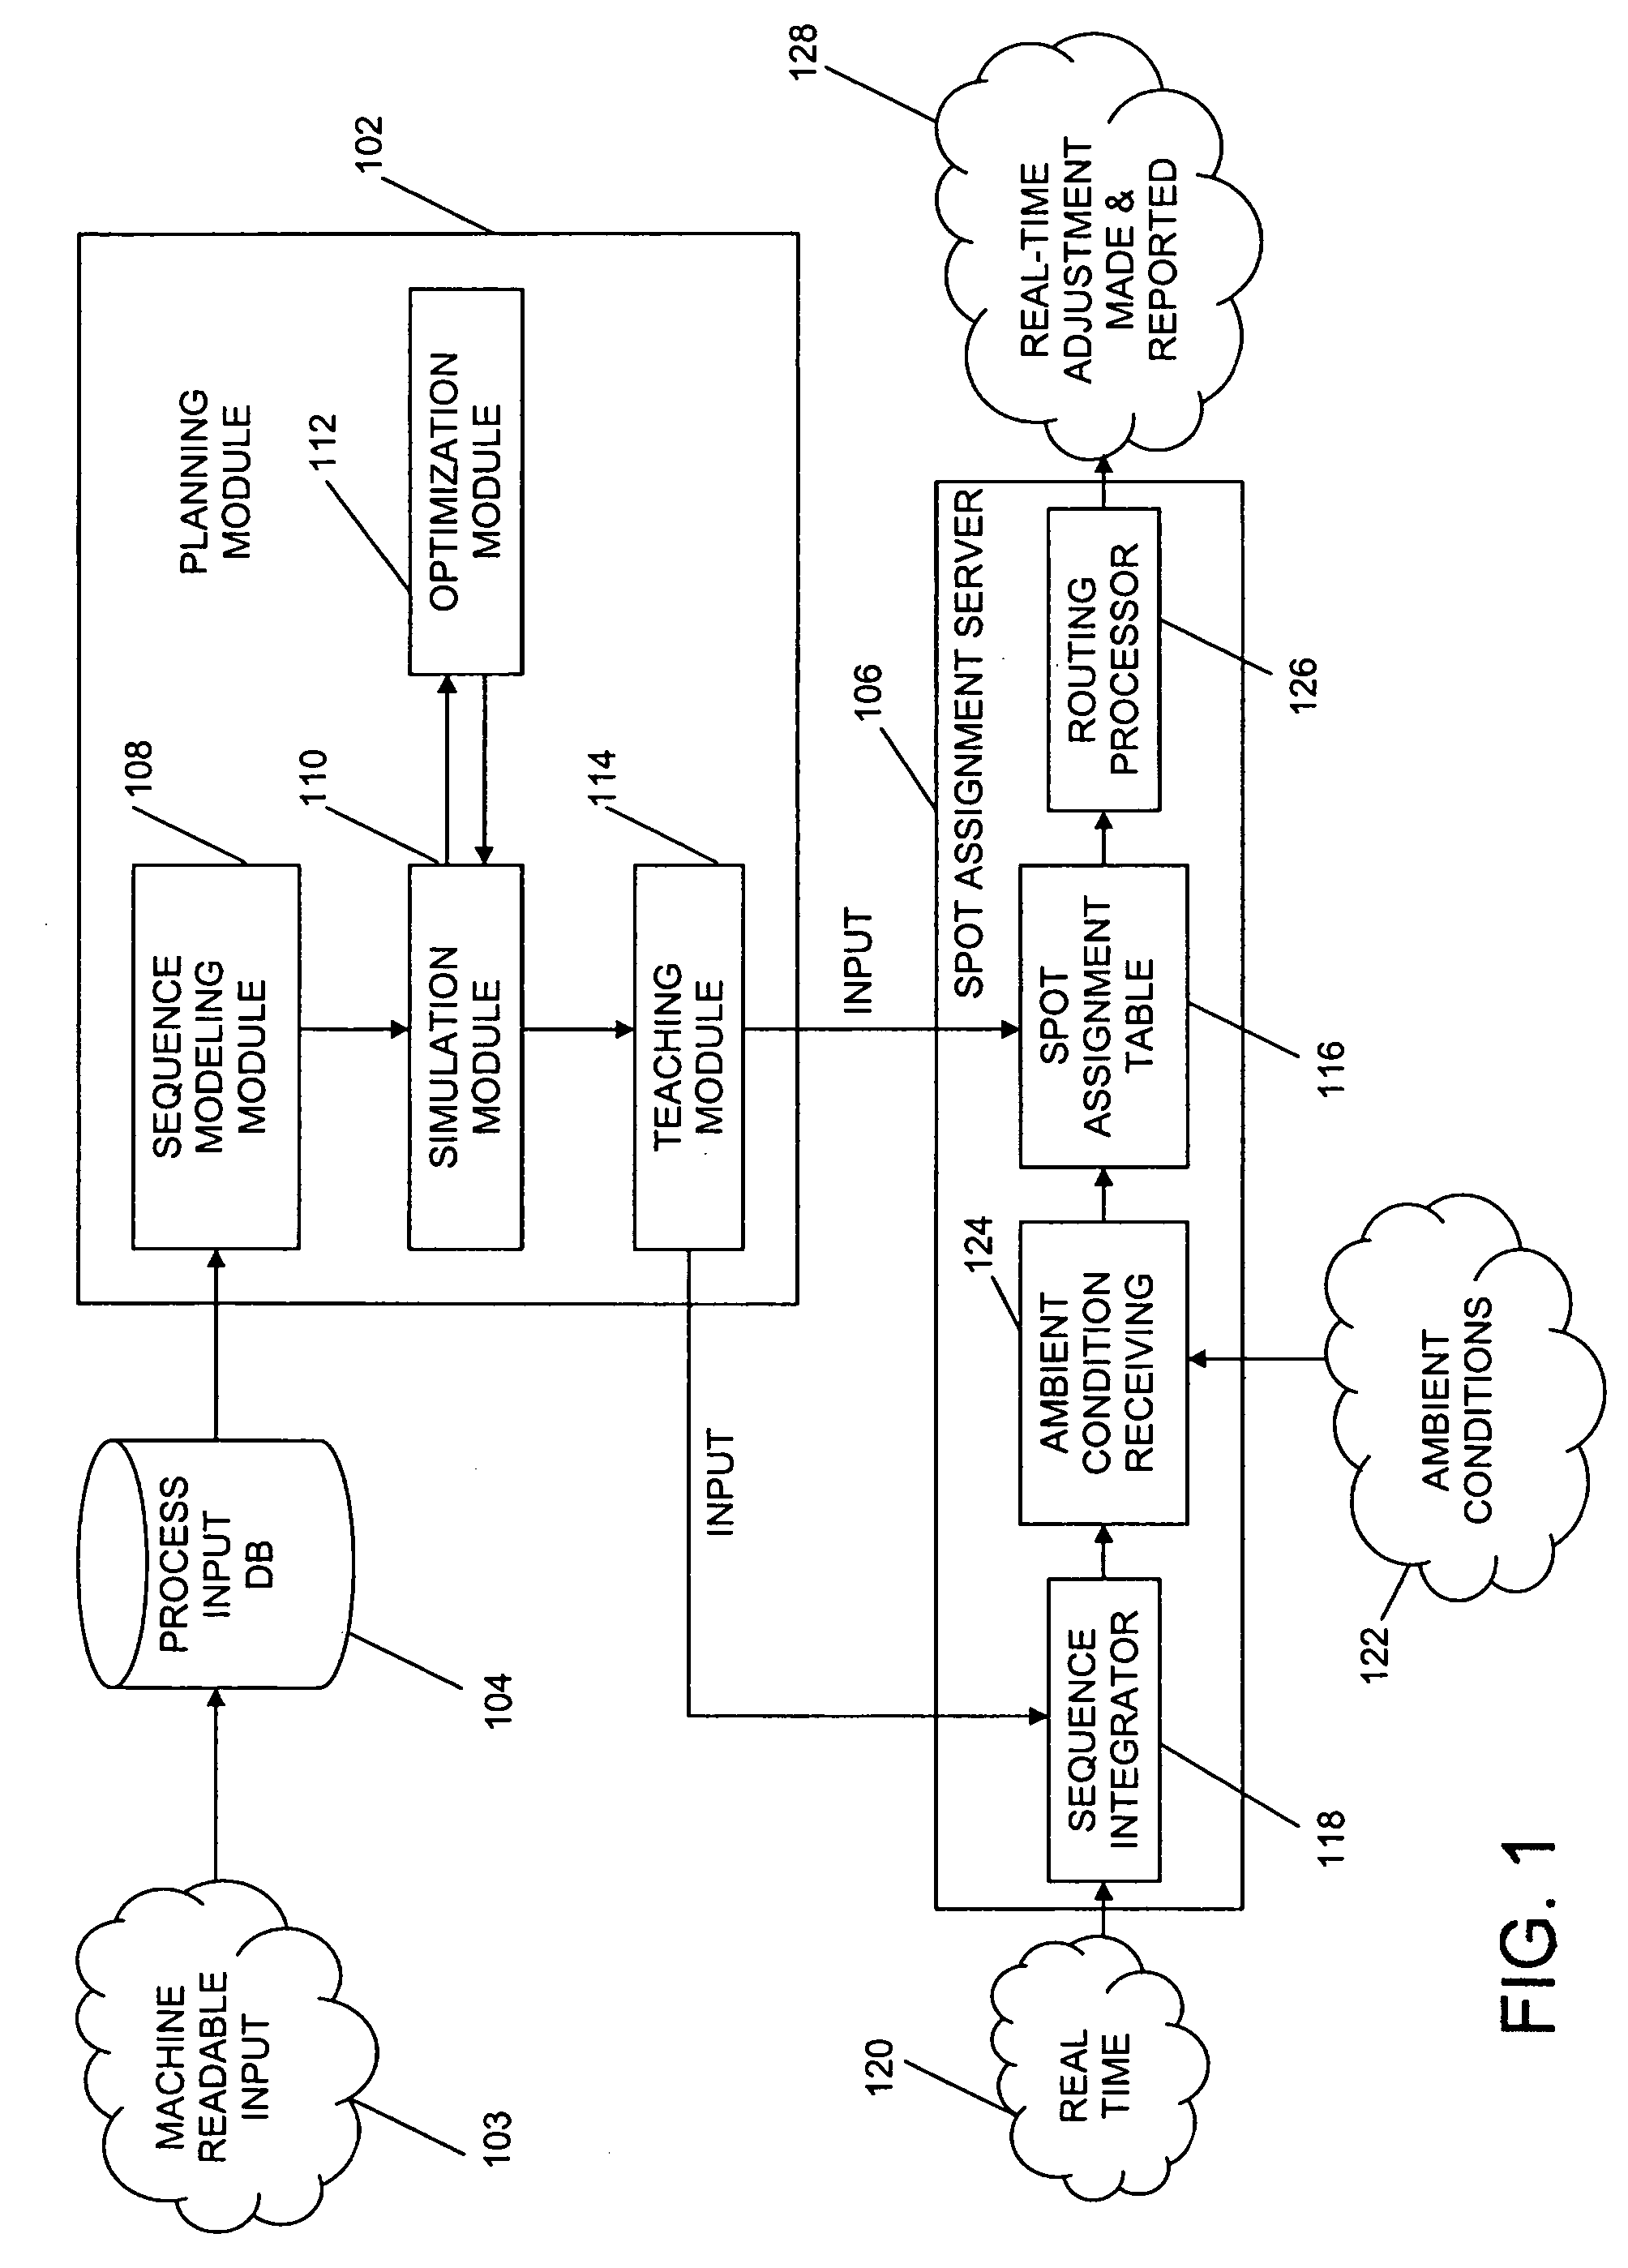 System and method for resource reallocation based on ambient condition data